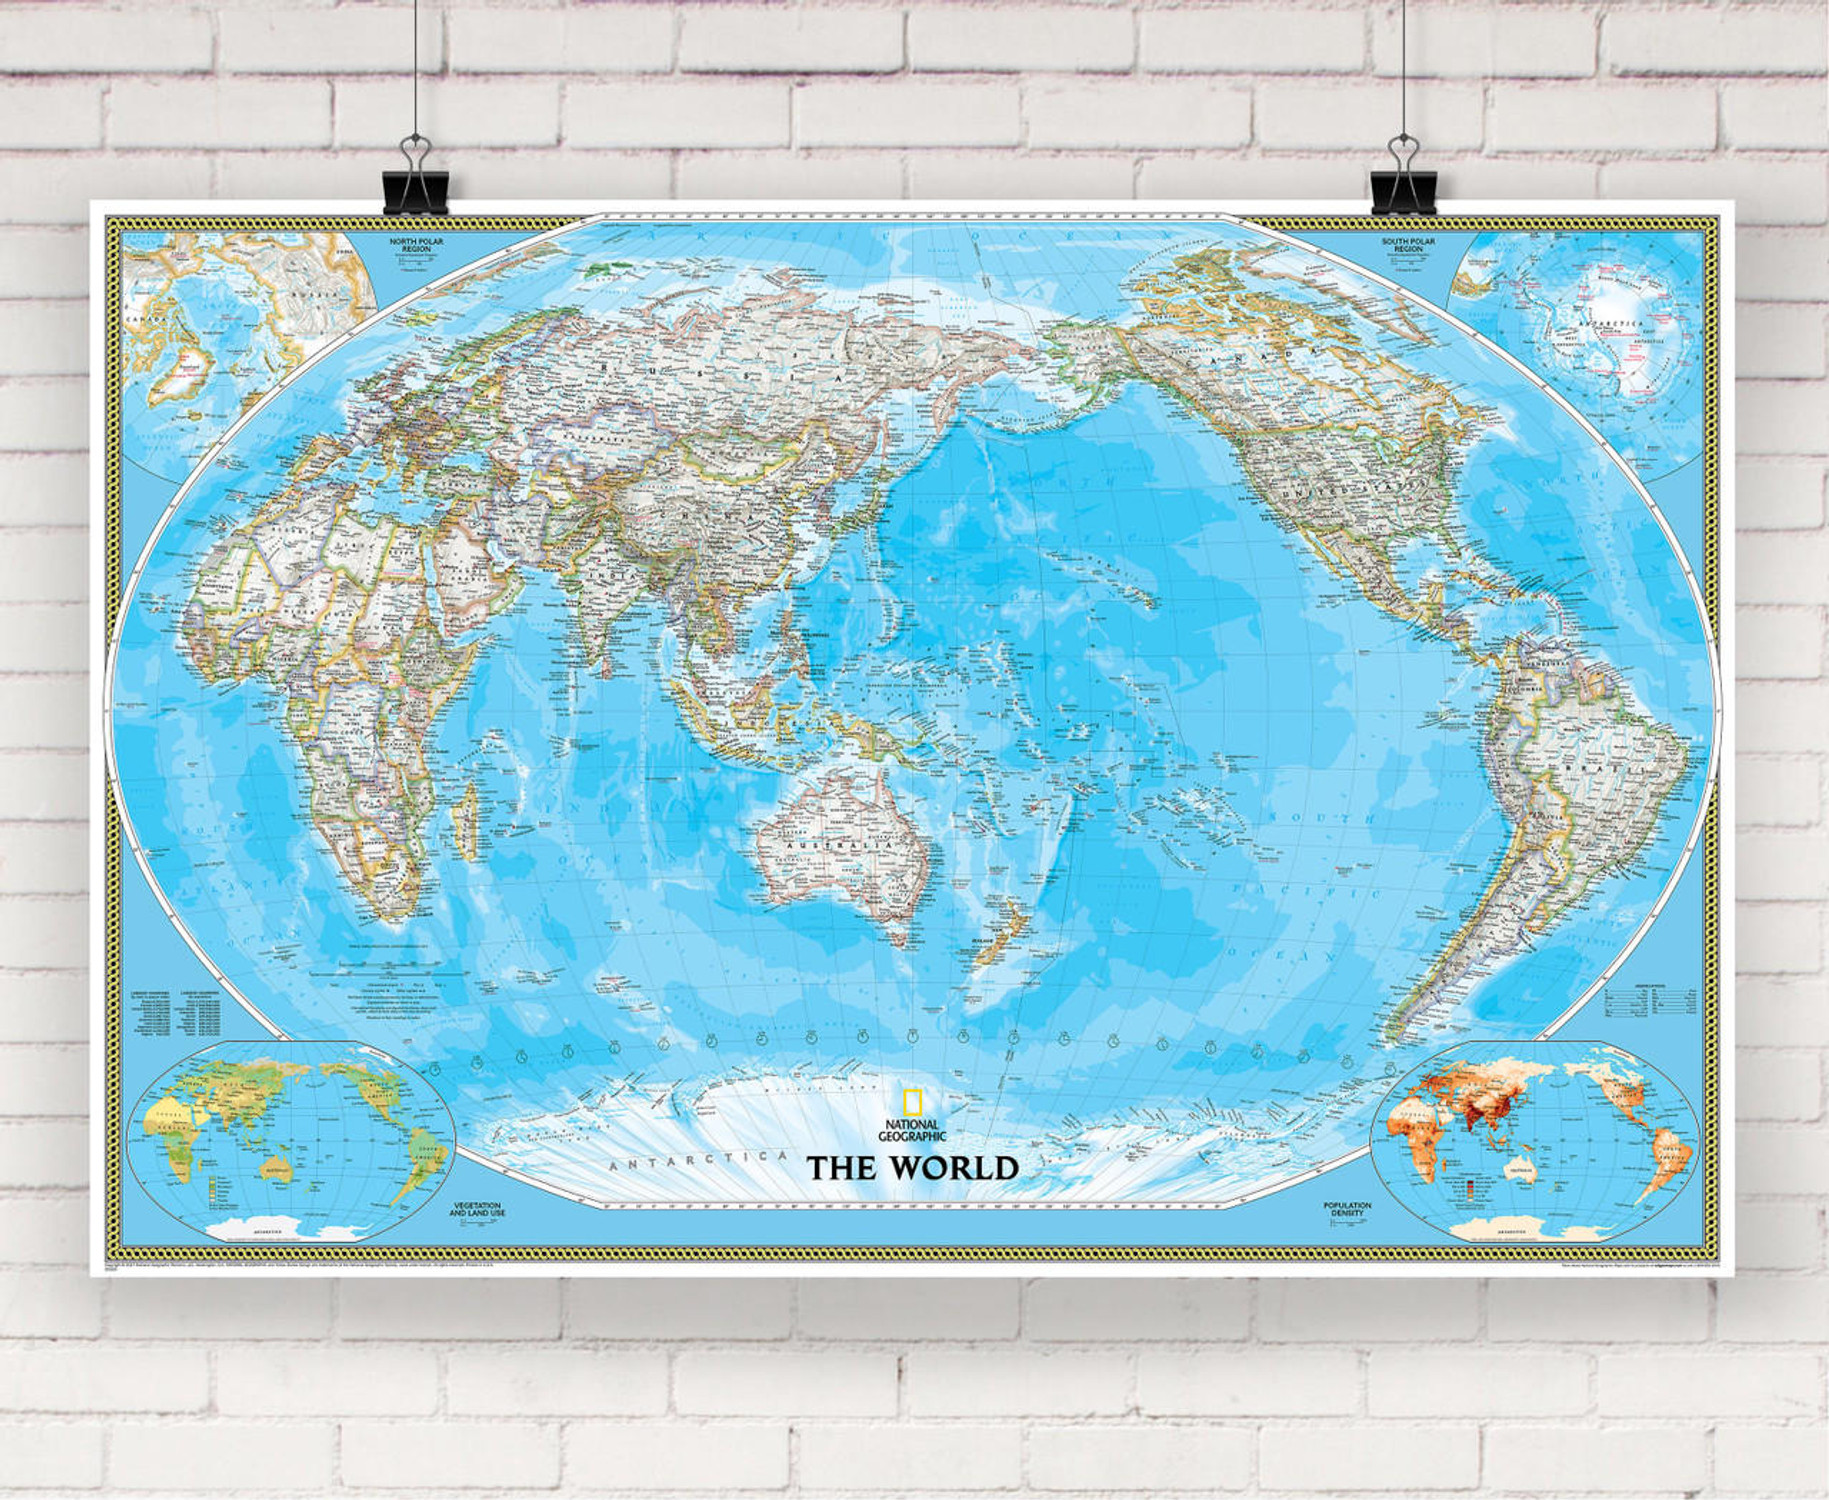 National Geographic World Classic Pacific Centered Wall Map, image 1, World Maps Online